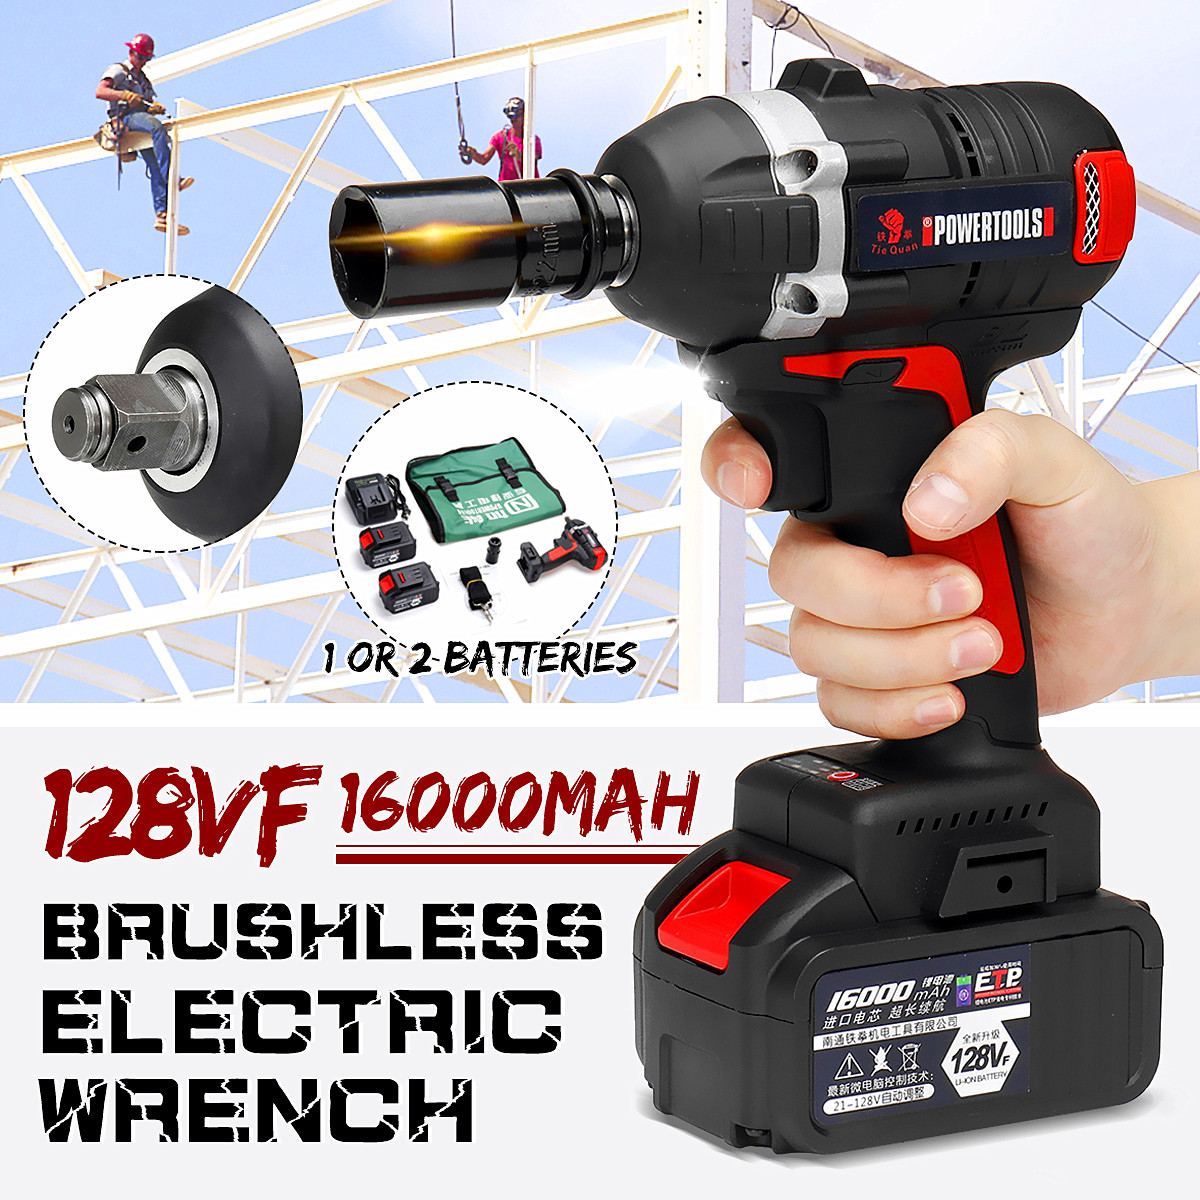 128VF-16000mah-Brushless-Electric-Wrench-Power-Wrench-Tool-330Nm-Cordless-Wrench-Kit-1437430-2